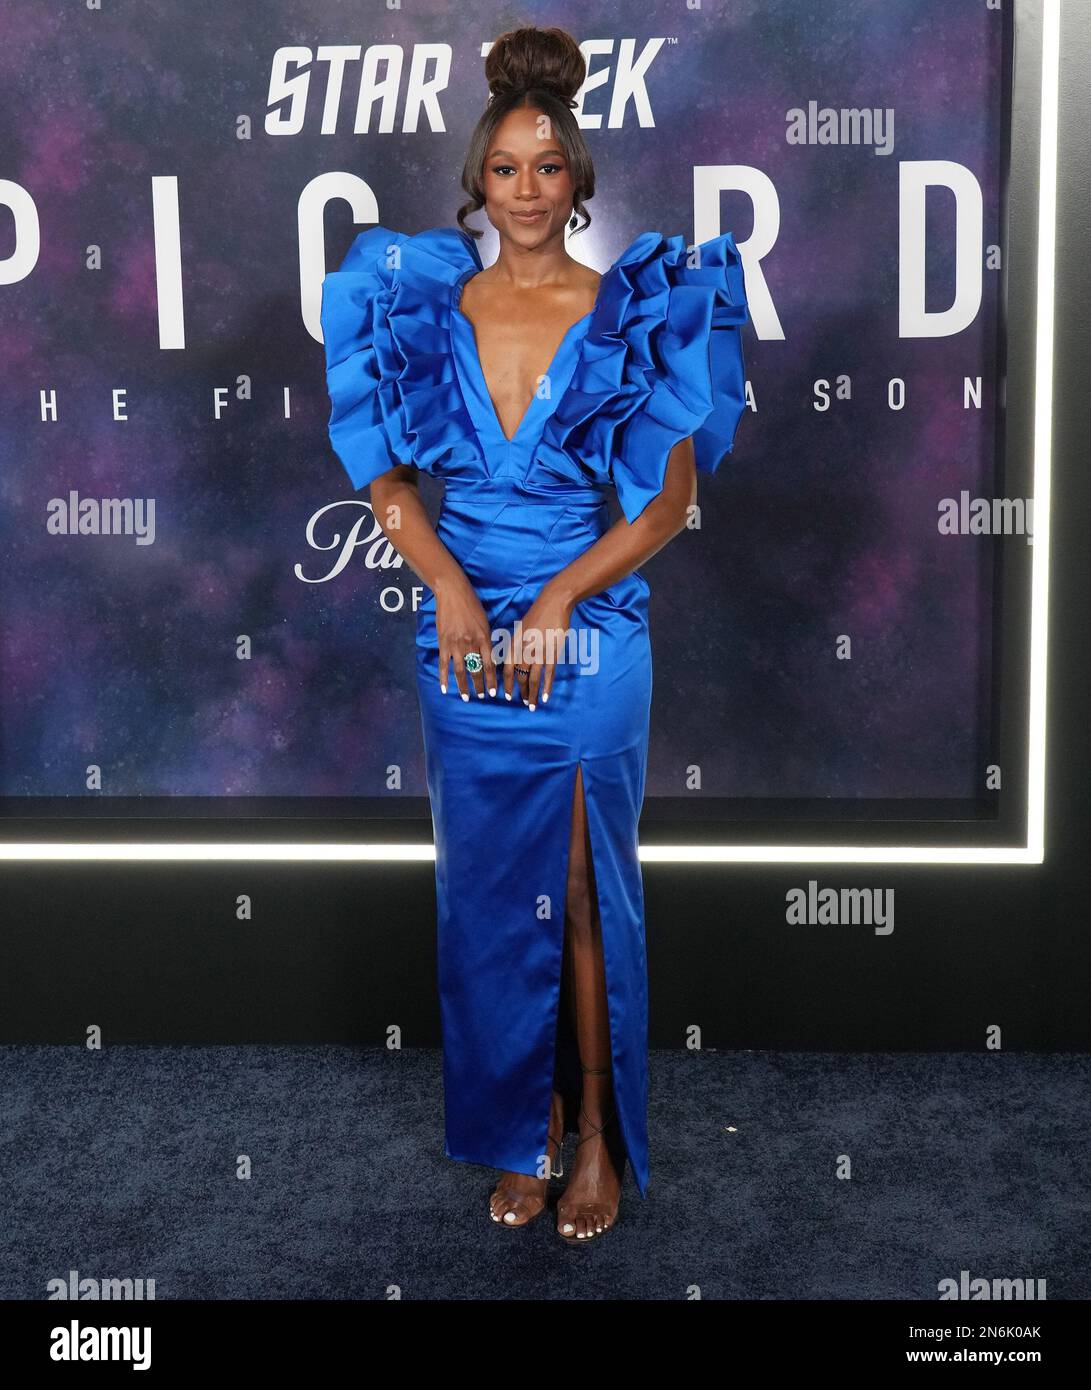 Los Angeles, USA. 09th Feb, 2023. Ashlei Sharpe Chestnut arrives at the Paramount  Original Series' STAR TREK: PICARD Final Season Premiere held at the TCL Chinese Theatre in Hollywood, CA on Thursday, February 9, 2023. (Photo By Sthanlee B. Mirador/Sipa USA) Credit: Sipa USA/Alamy Live News Stock Photo